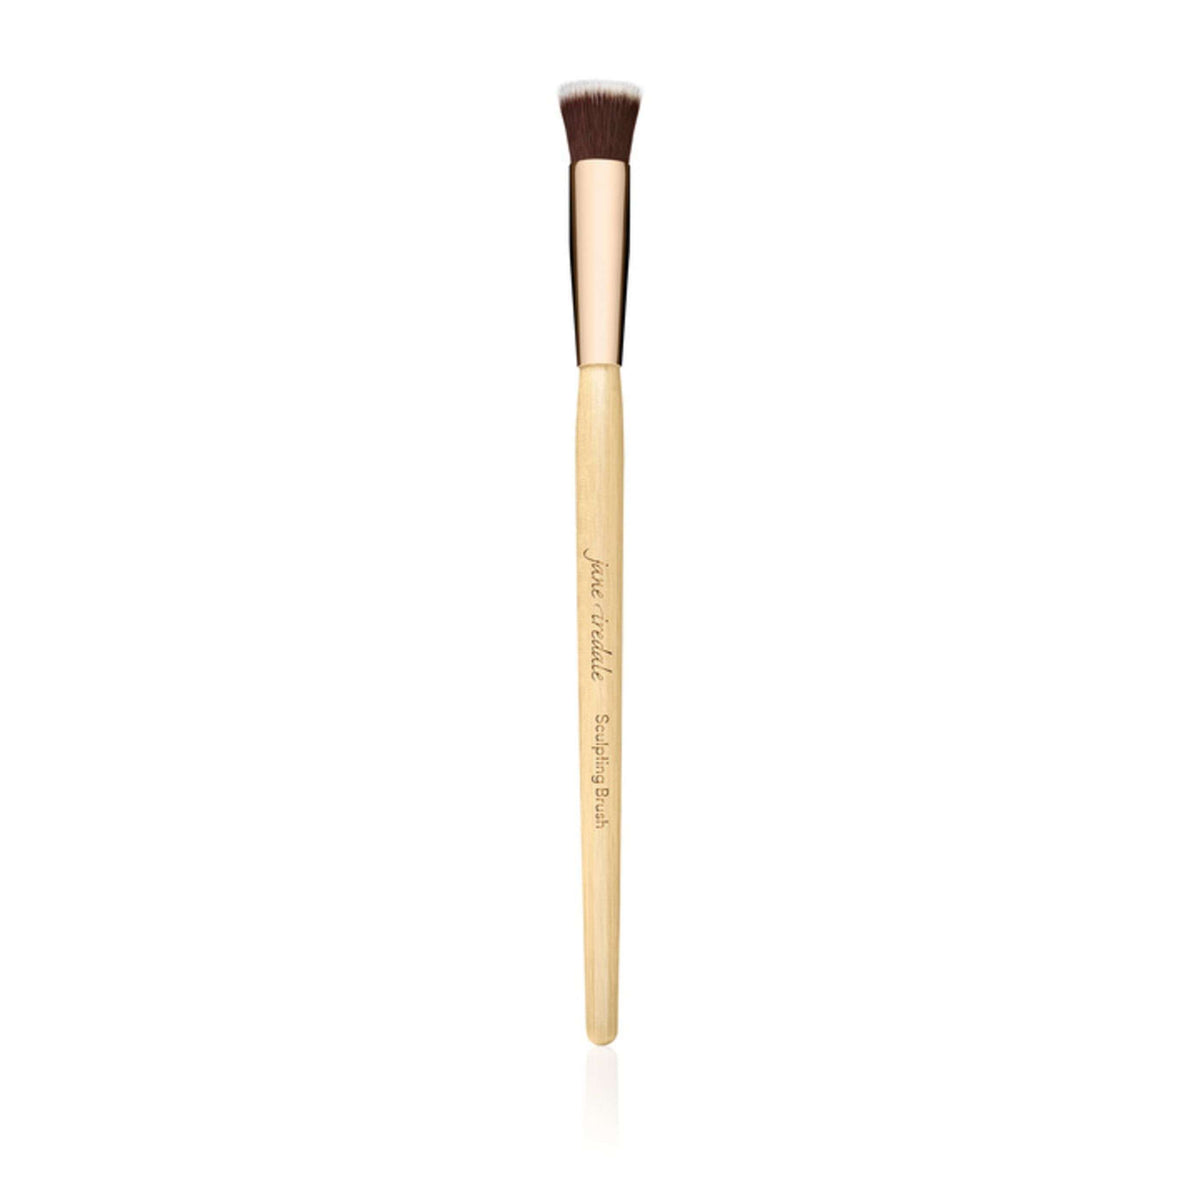 Jane Iredale Sculpting Brush at Socialite Beauty Canada